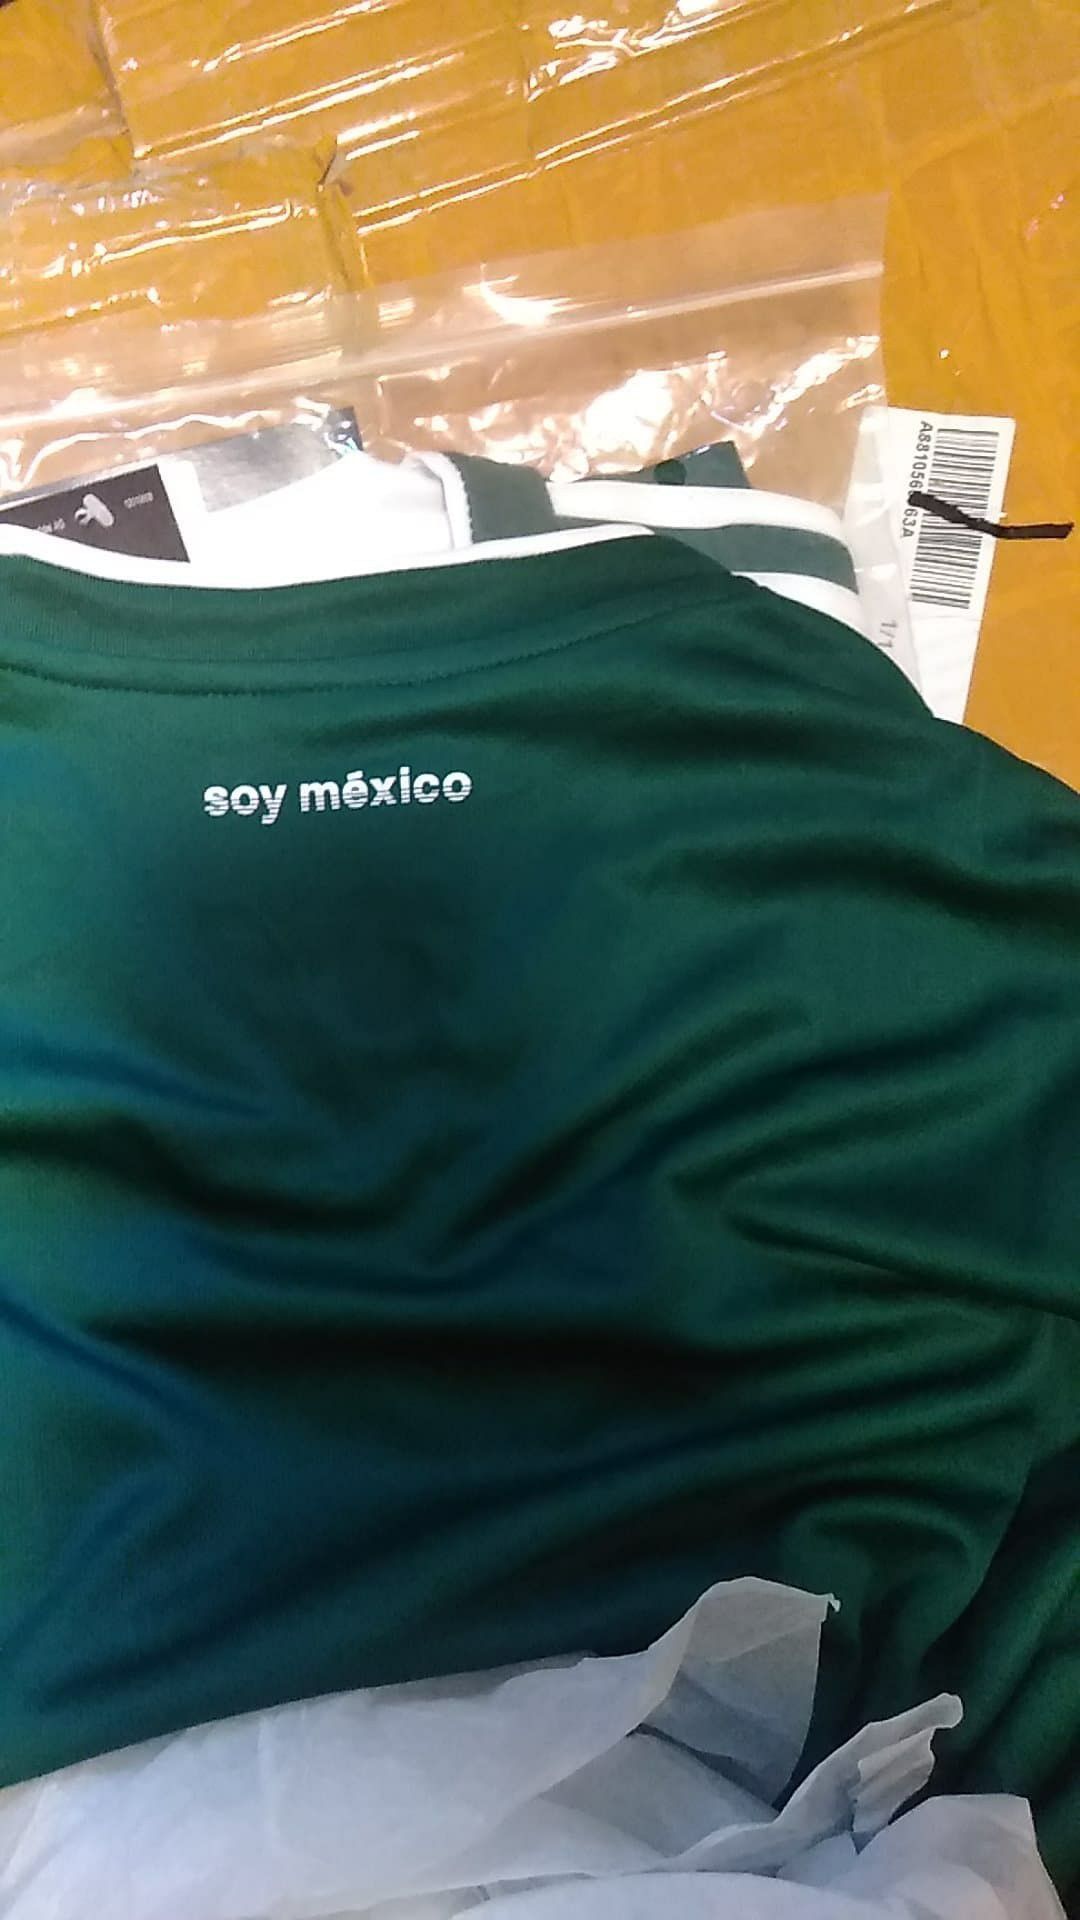 Mexico Jersey soccer sizes S and M